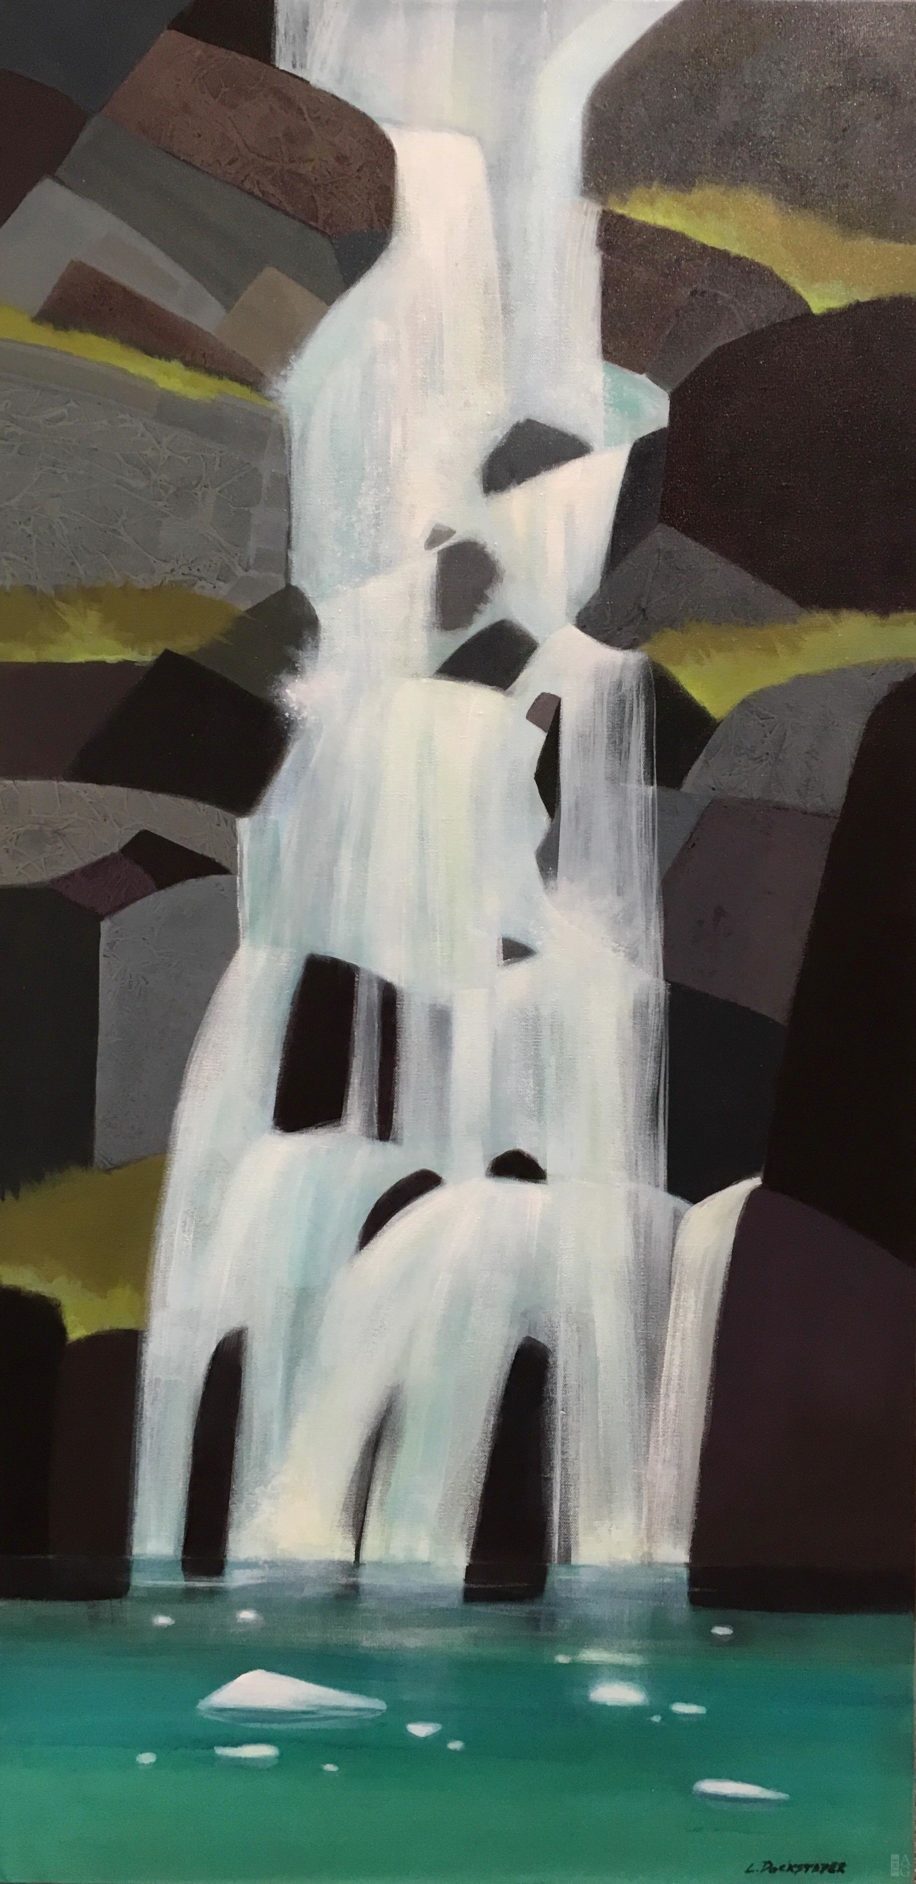 Landscape painting, Coastal Waterfall by Lorna Dockstader at The Avenue Gallery, a contemporary fine art gallery in Victoria, BC, Canada.